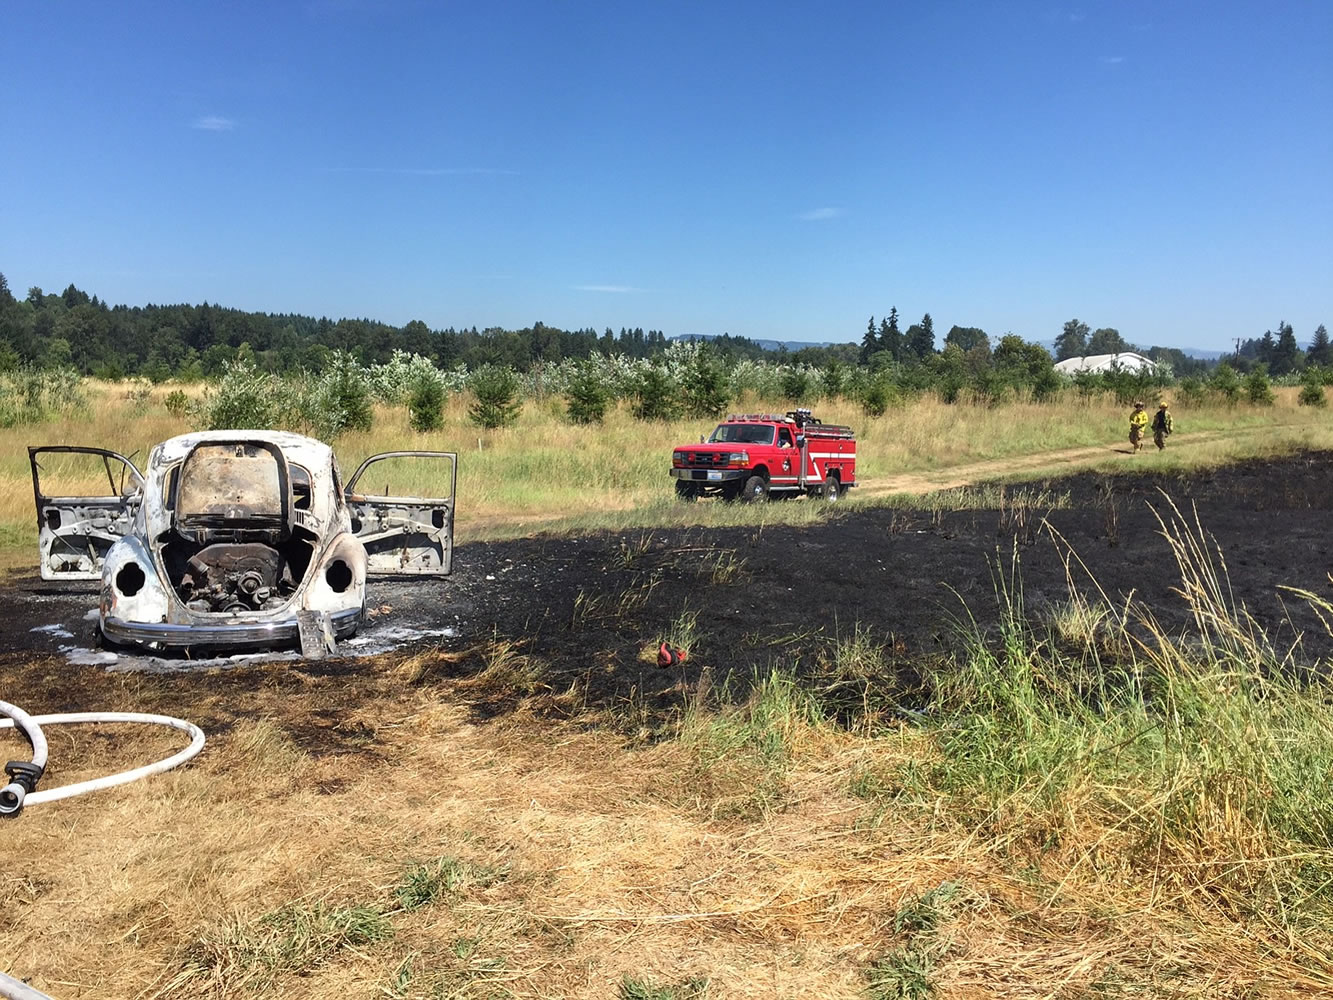 Remains of a burned-out Volkswagen Beetle sit in a field after a car fire spread to dry grass off Northeast 259th Street on Thursday.